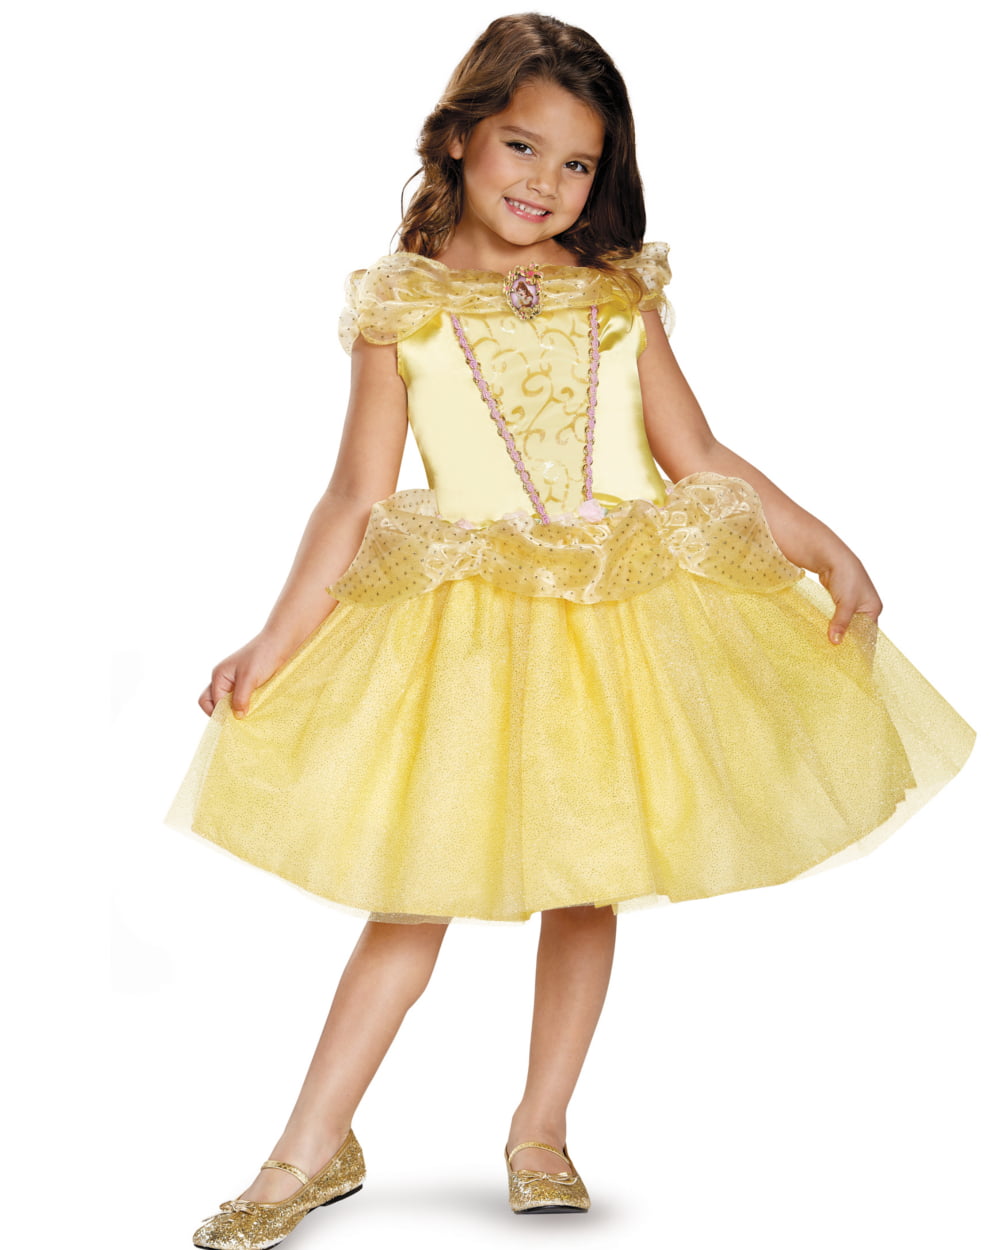 Peachi B1 Little Girl Princess Belle Dress Costume for Beauty Cosplay Halloween Party